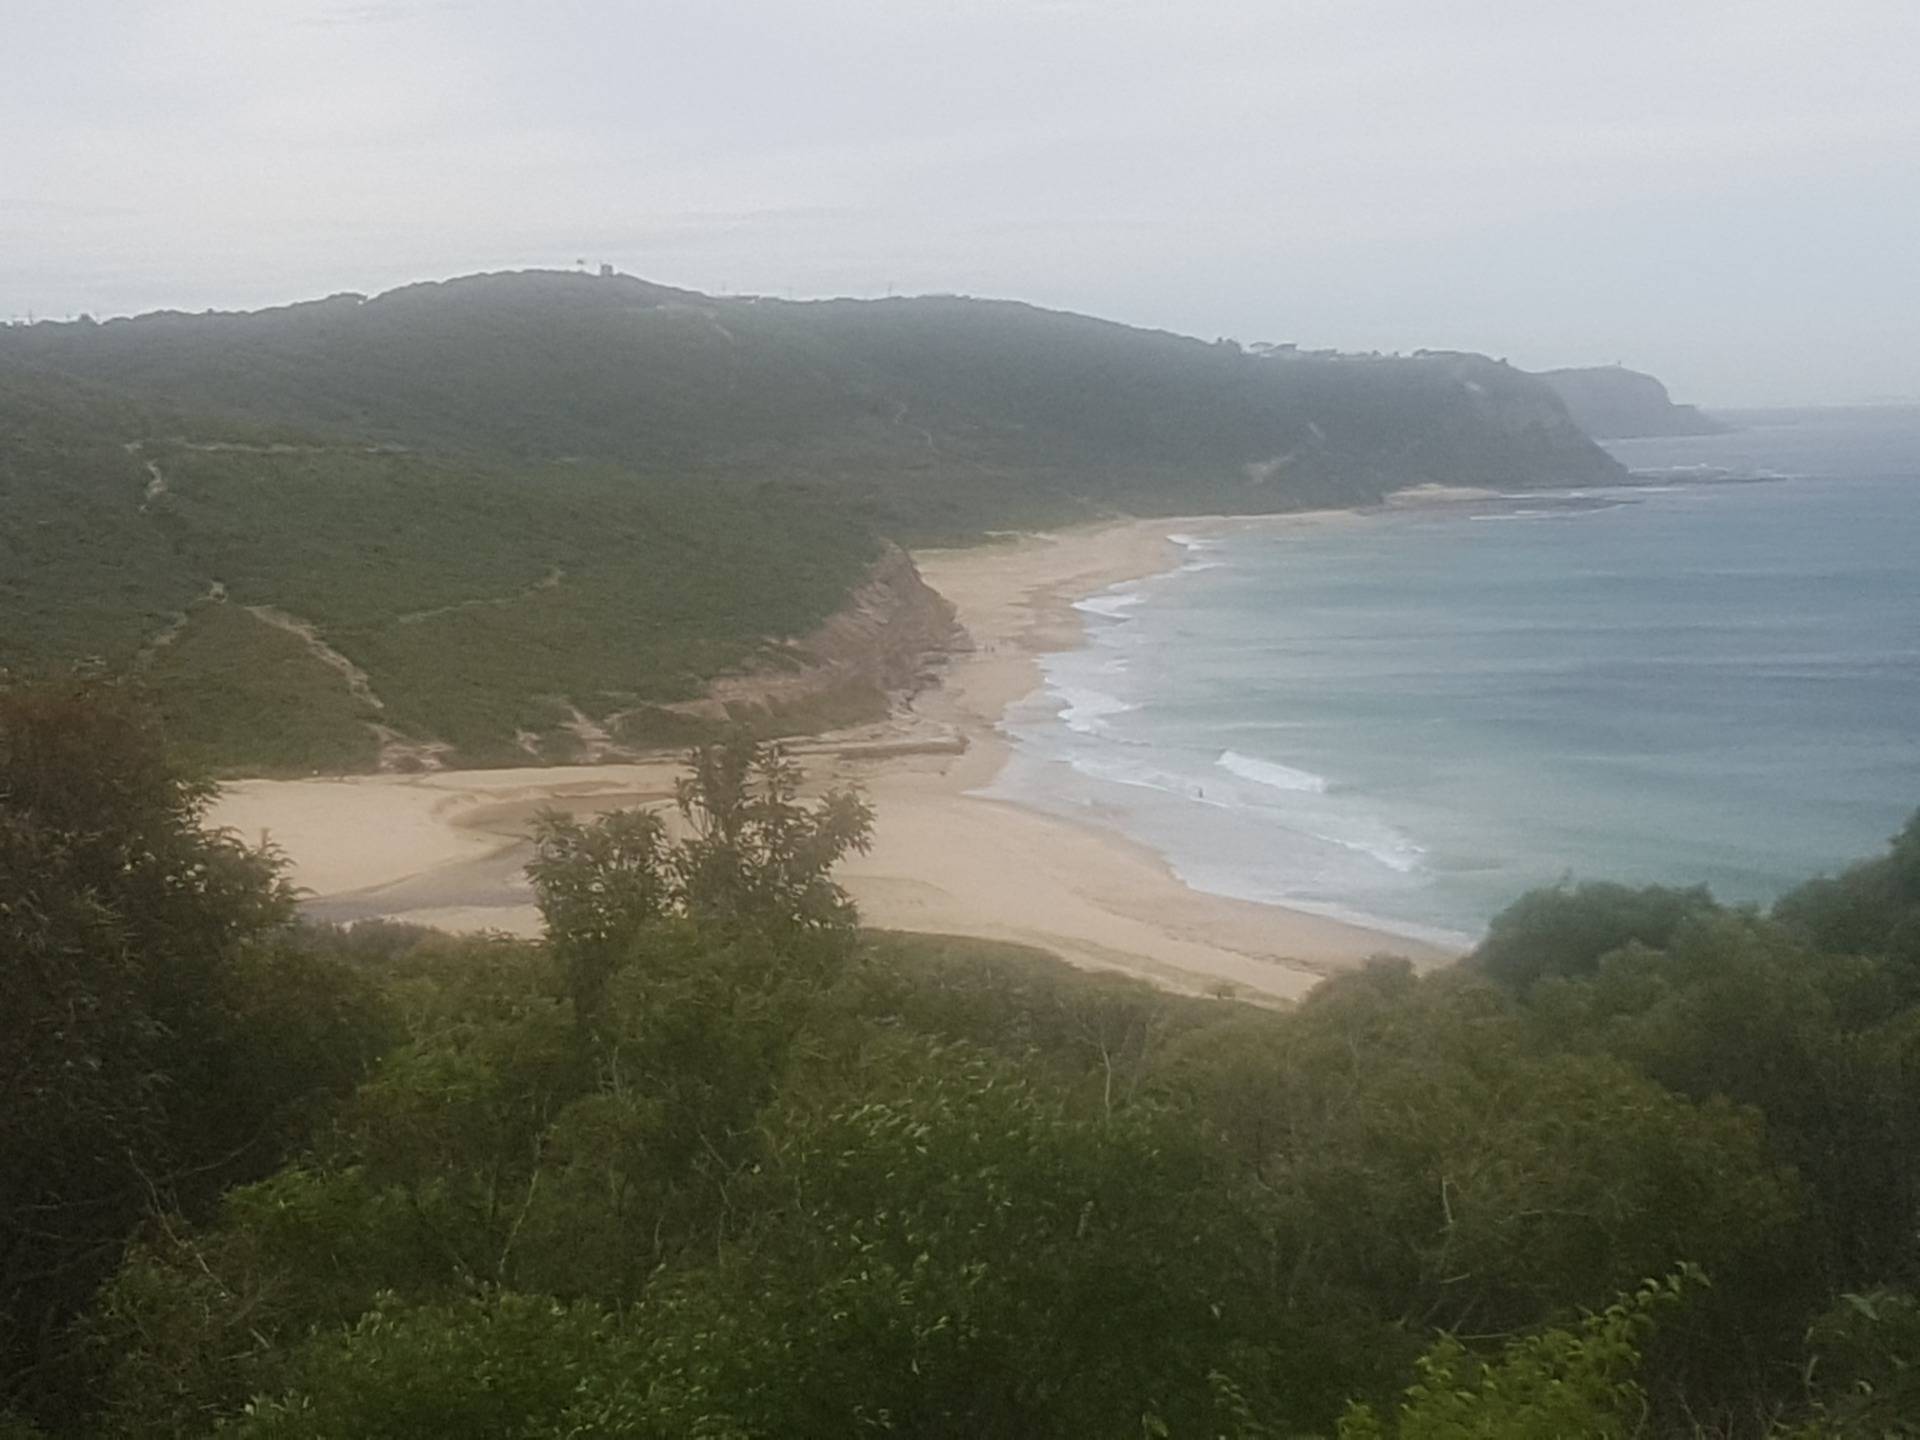 A view of Burwood or Glenrock beach from the top of the hill depending on who you talk to.